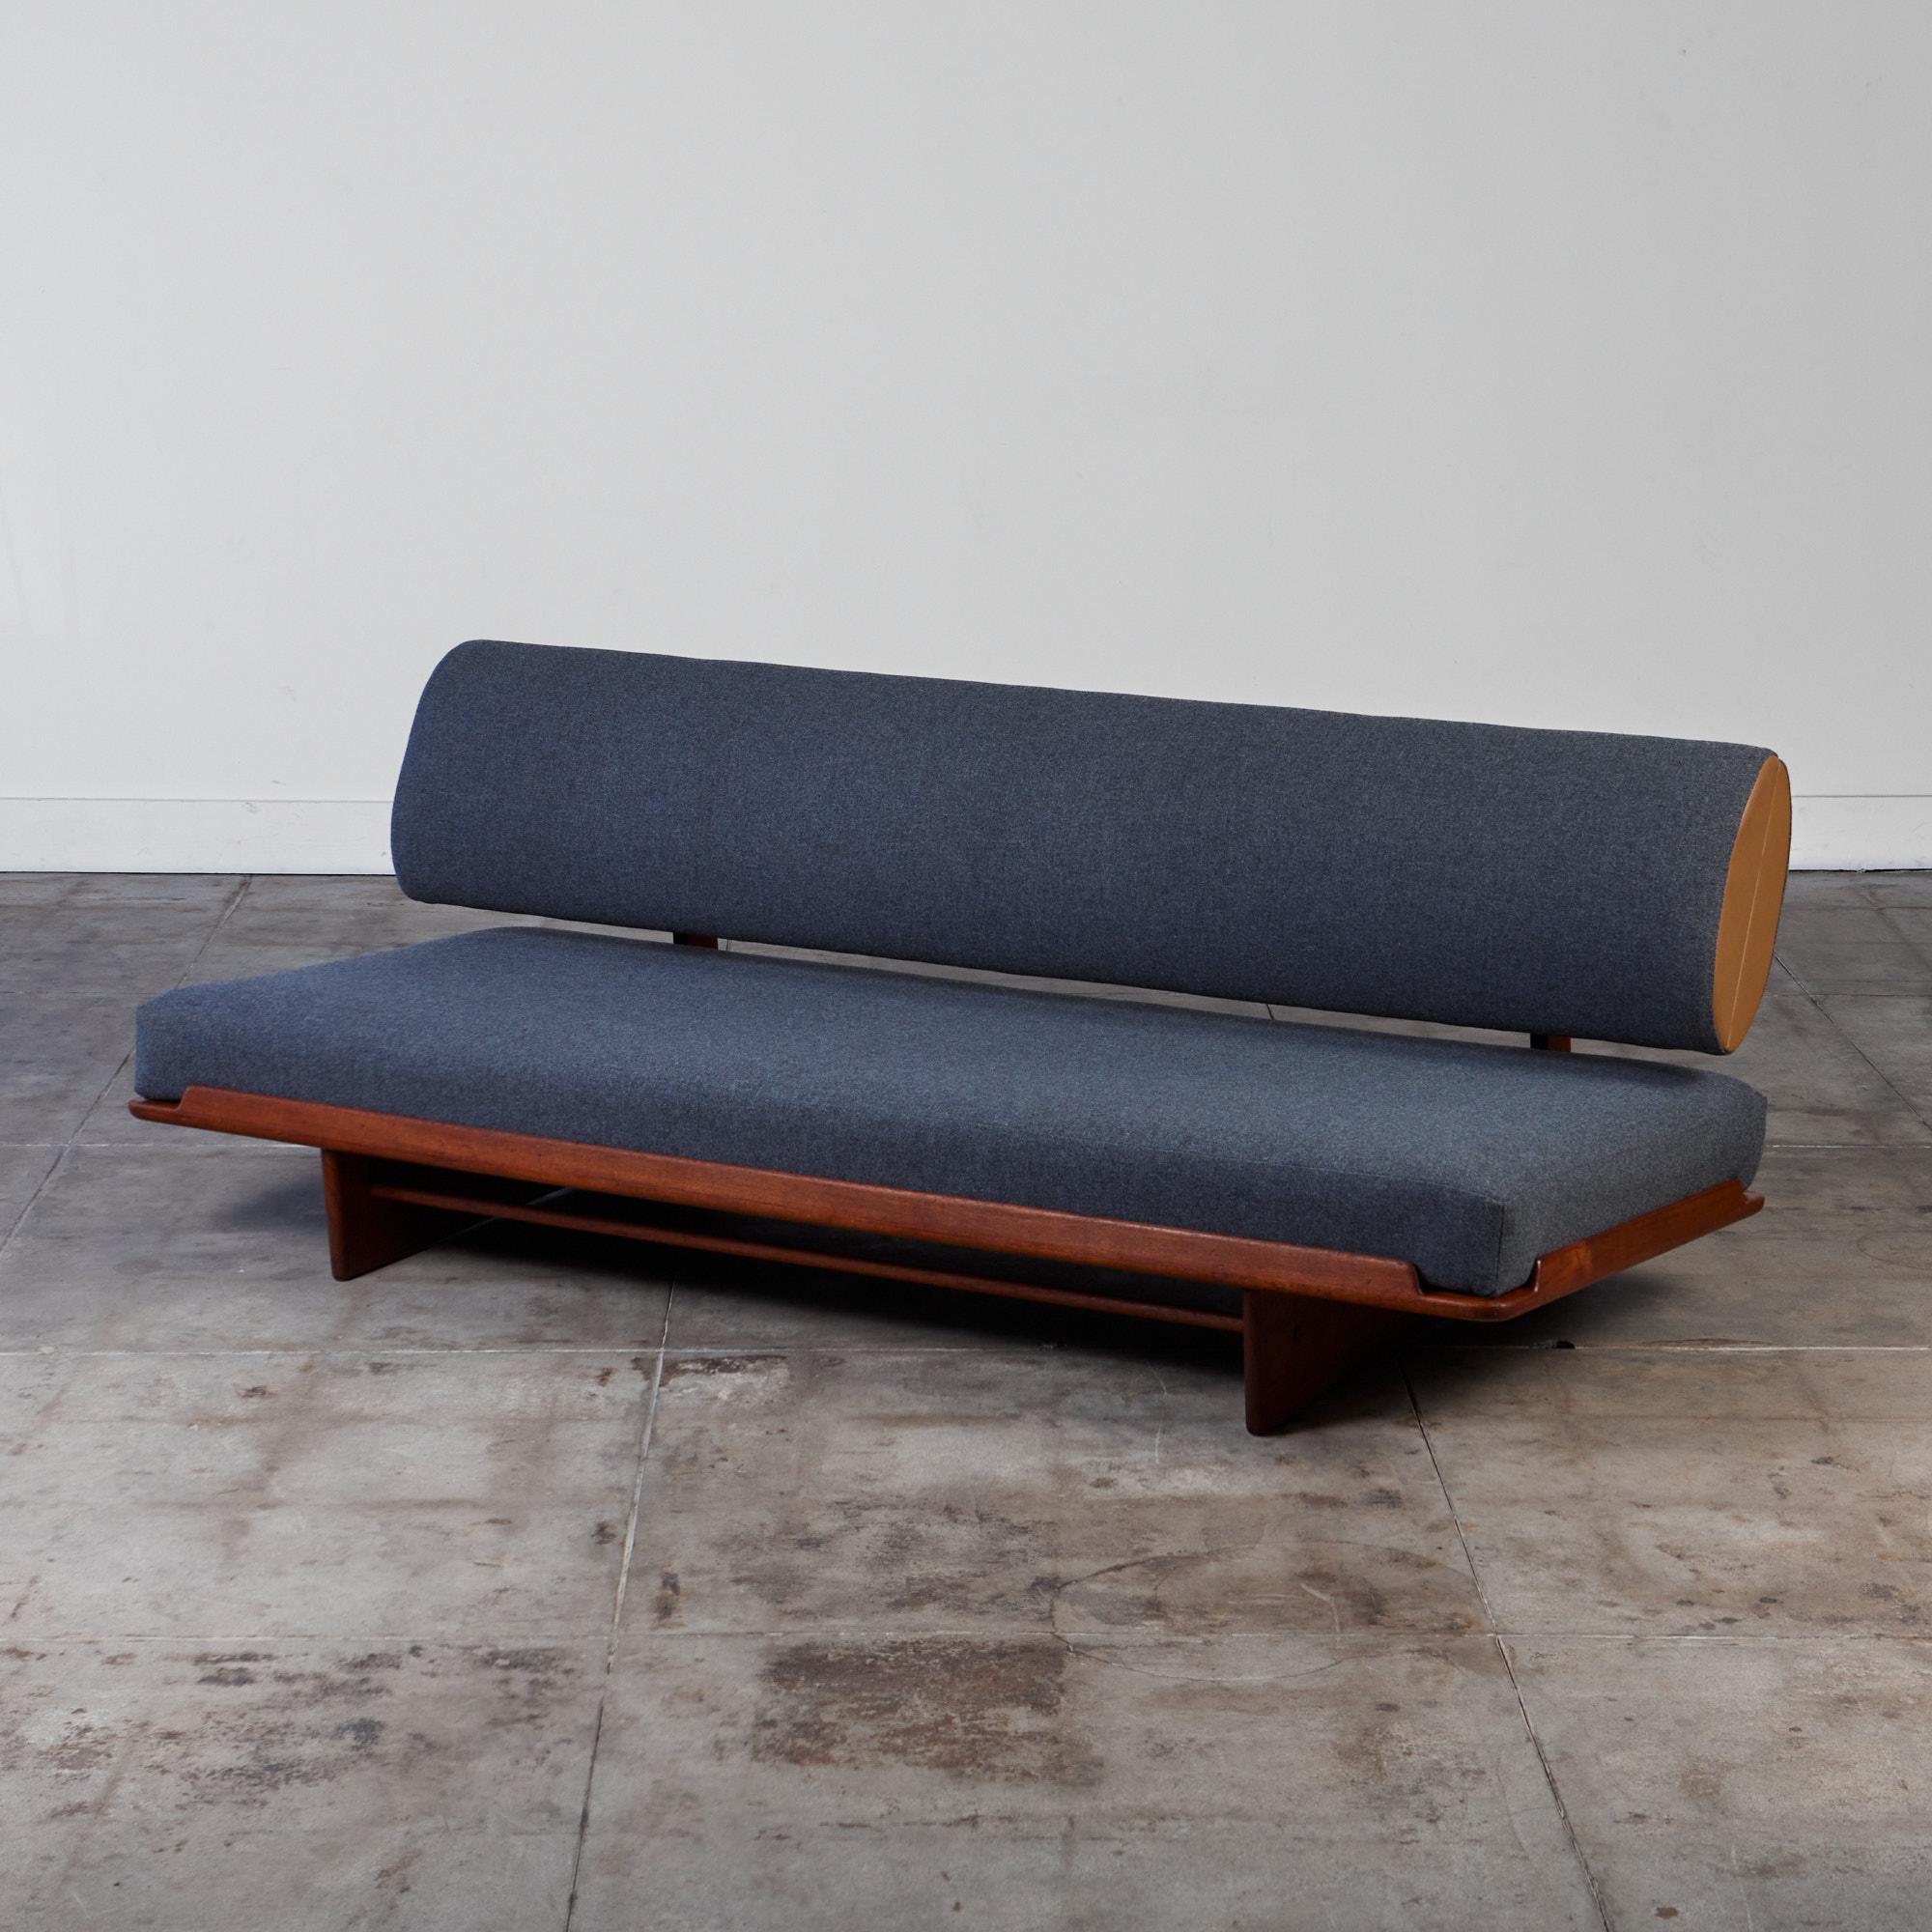 Rare convertible teak daybed by Grete Jalk for Poul Jeppesen, c.1960s. This piece features unique design elements making it the ideal daybed. The wide seat cushion can be gently pulled out creating a deeper flat sleeping surface, perfect for